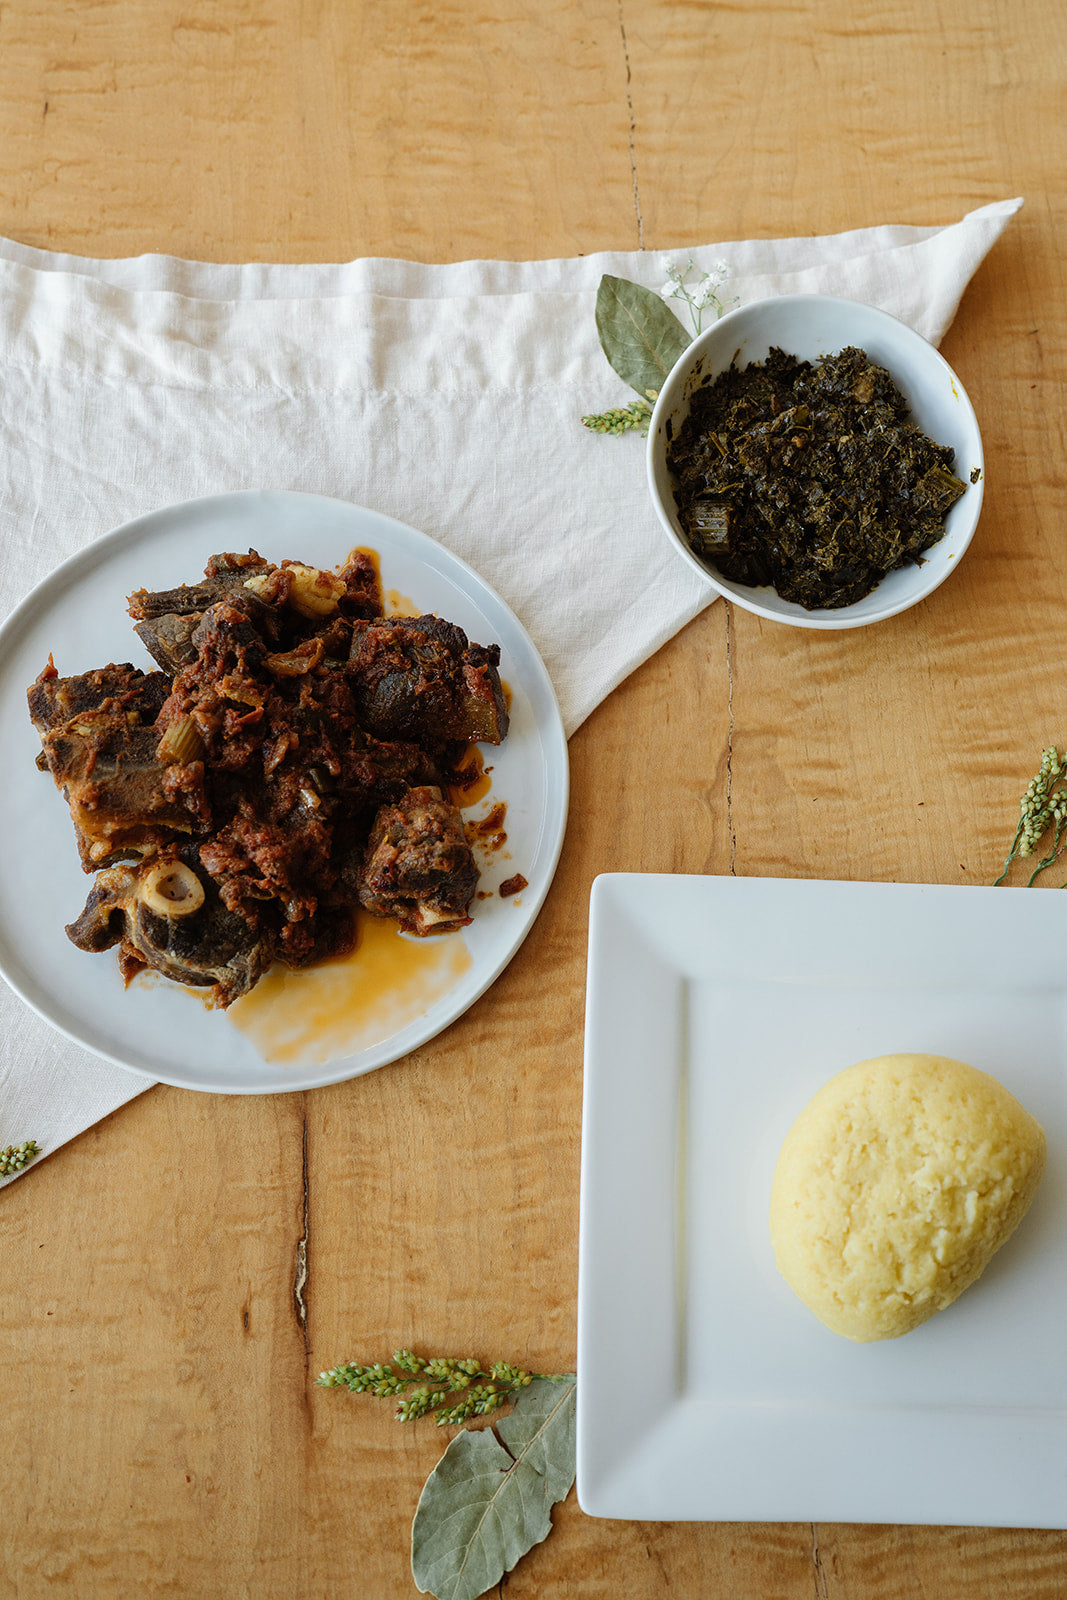 Goat Meat, Fufu, and Sombe Cooking Class:  Saturday, November 18th 3:30-6:00pm